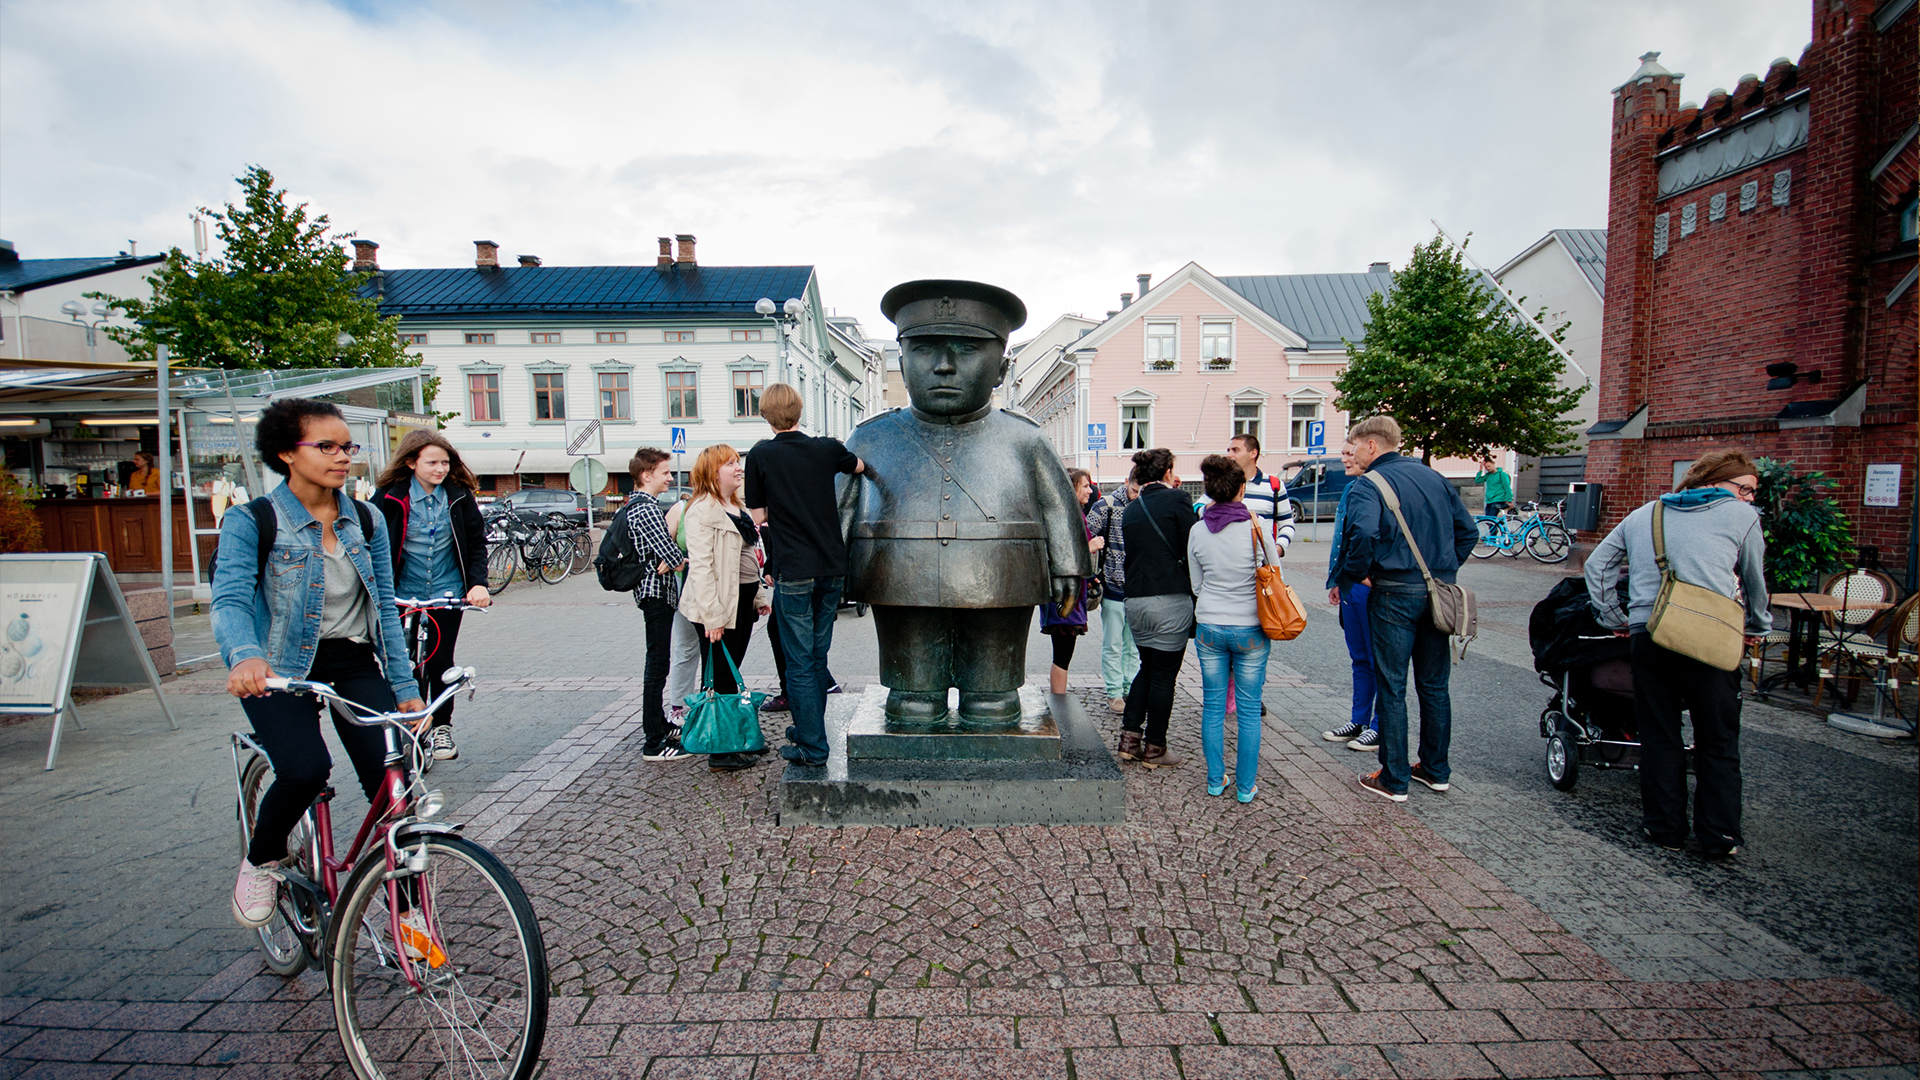 Nothing to see here! Just kidding… Find the main attractions in Oulu